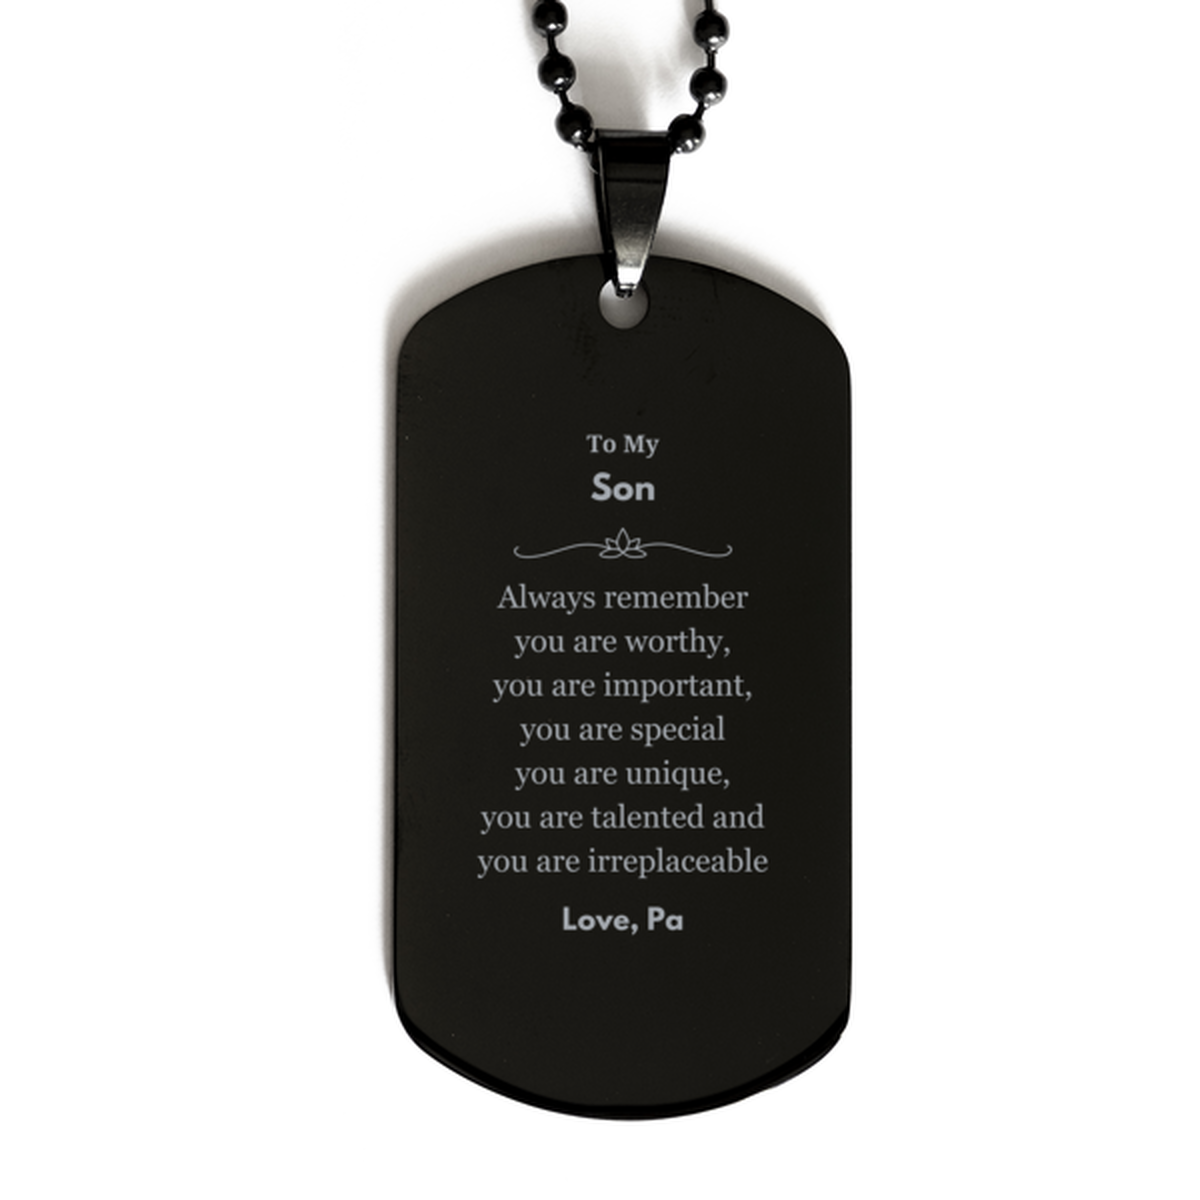 Son Birthday Gifts from Pa, Inspirational Black Dog Tag for Son Christmas Graduation Gifts for Son Always remember you are worthy, you are important. Love, Pa